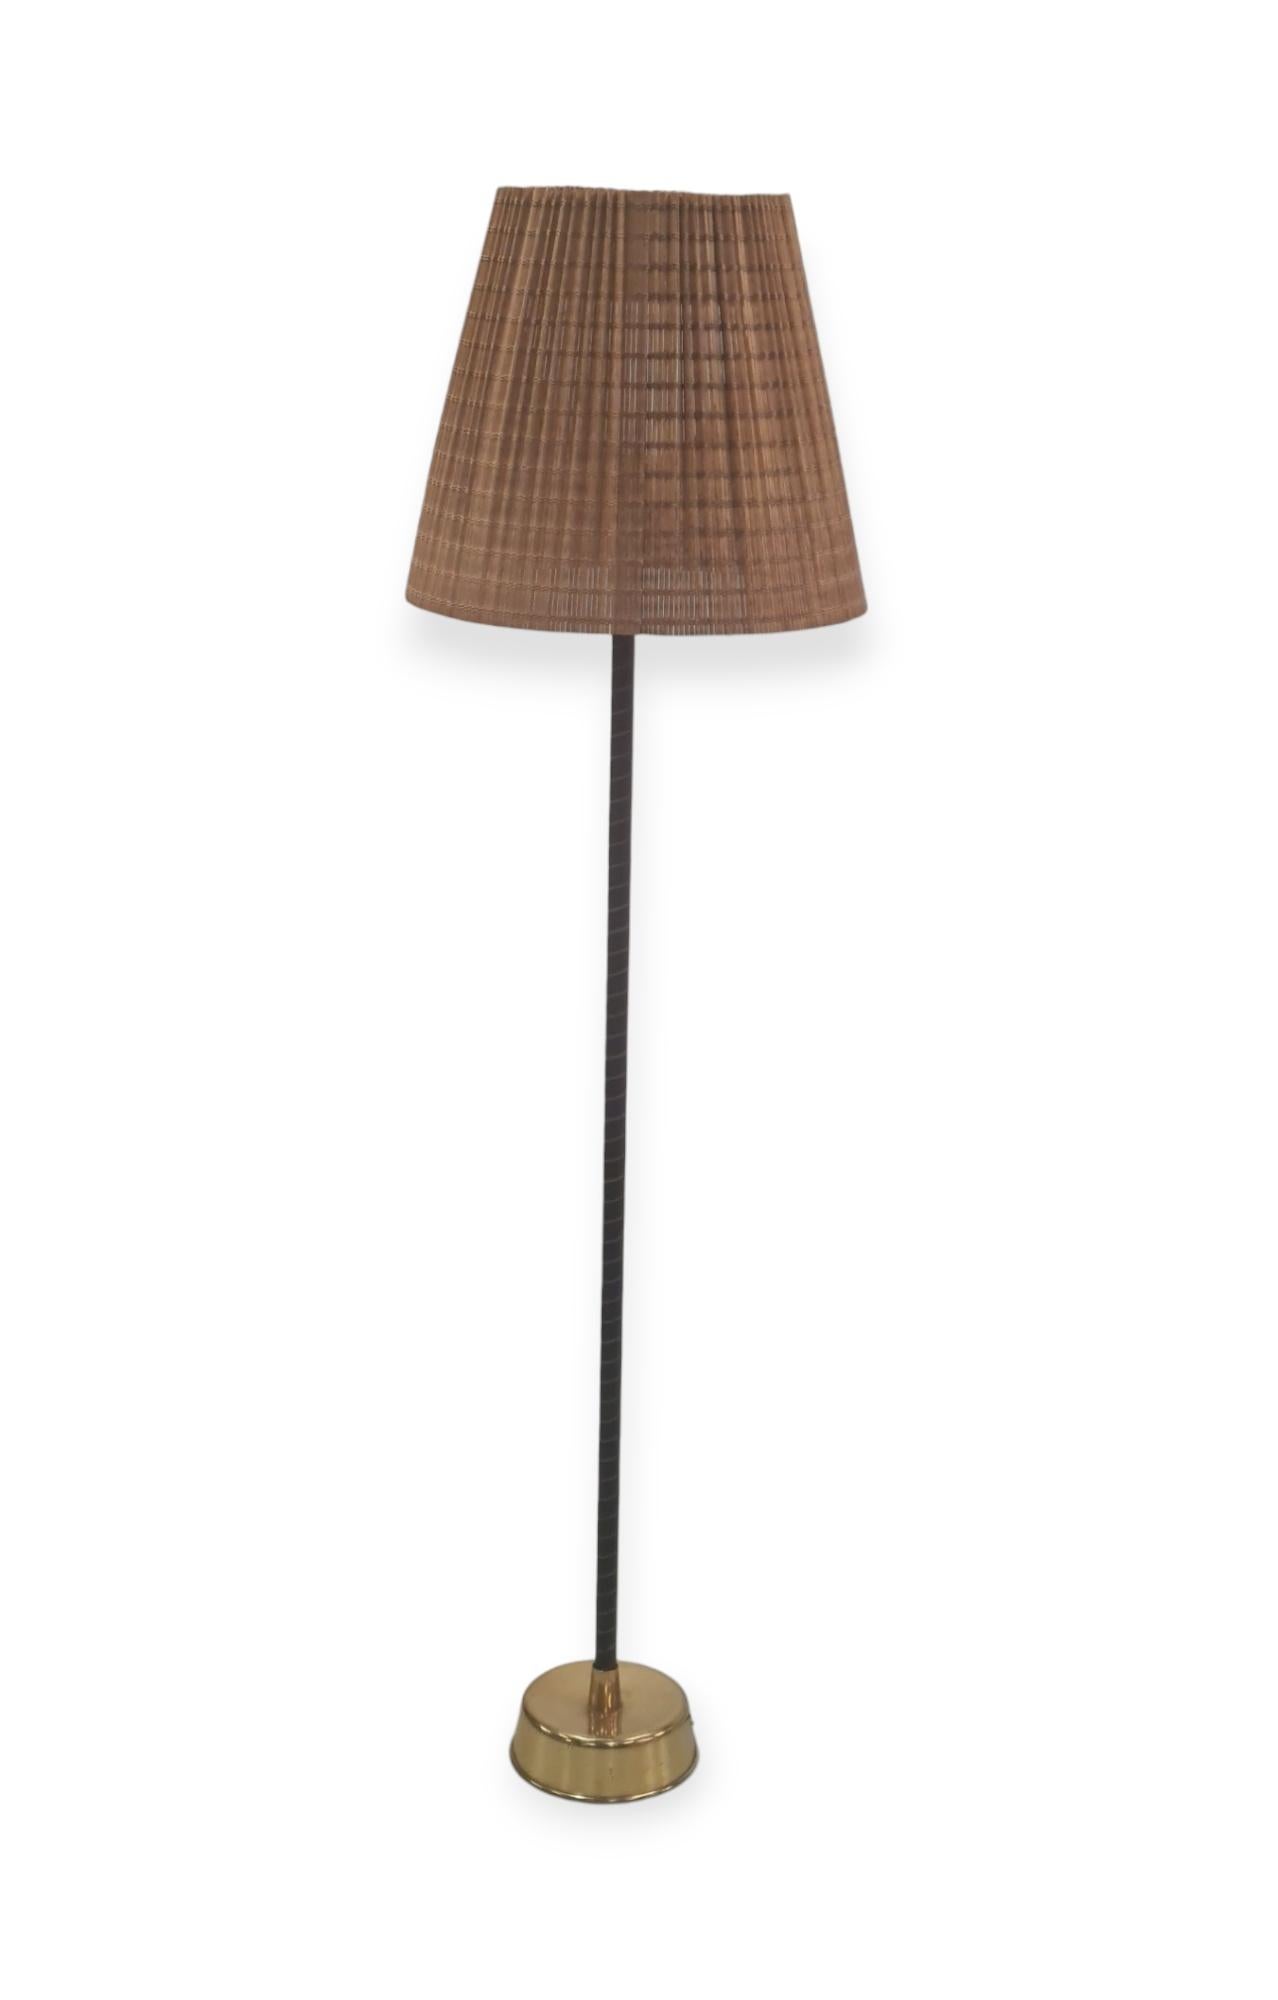 Lisa Johansson-Papé Ihanne Floor Lamp, Orno for Stockmann 1960s In Good Condition For Sale In Helsinki, FI